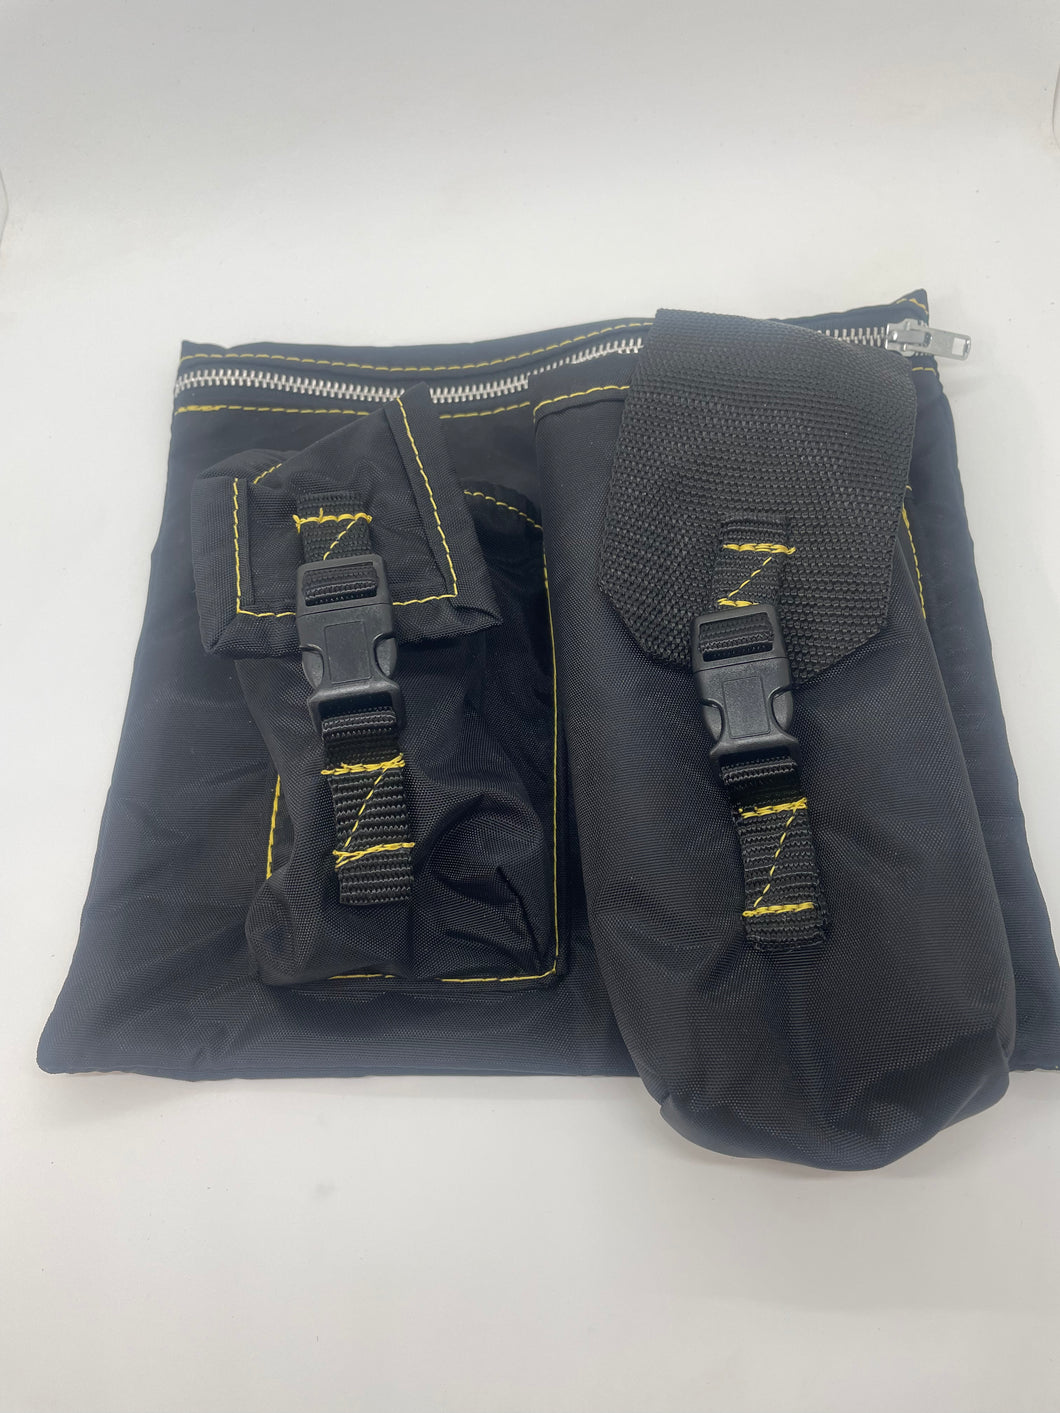 Waist Garmin and thermal pack